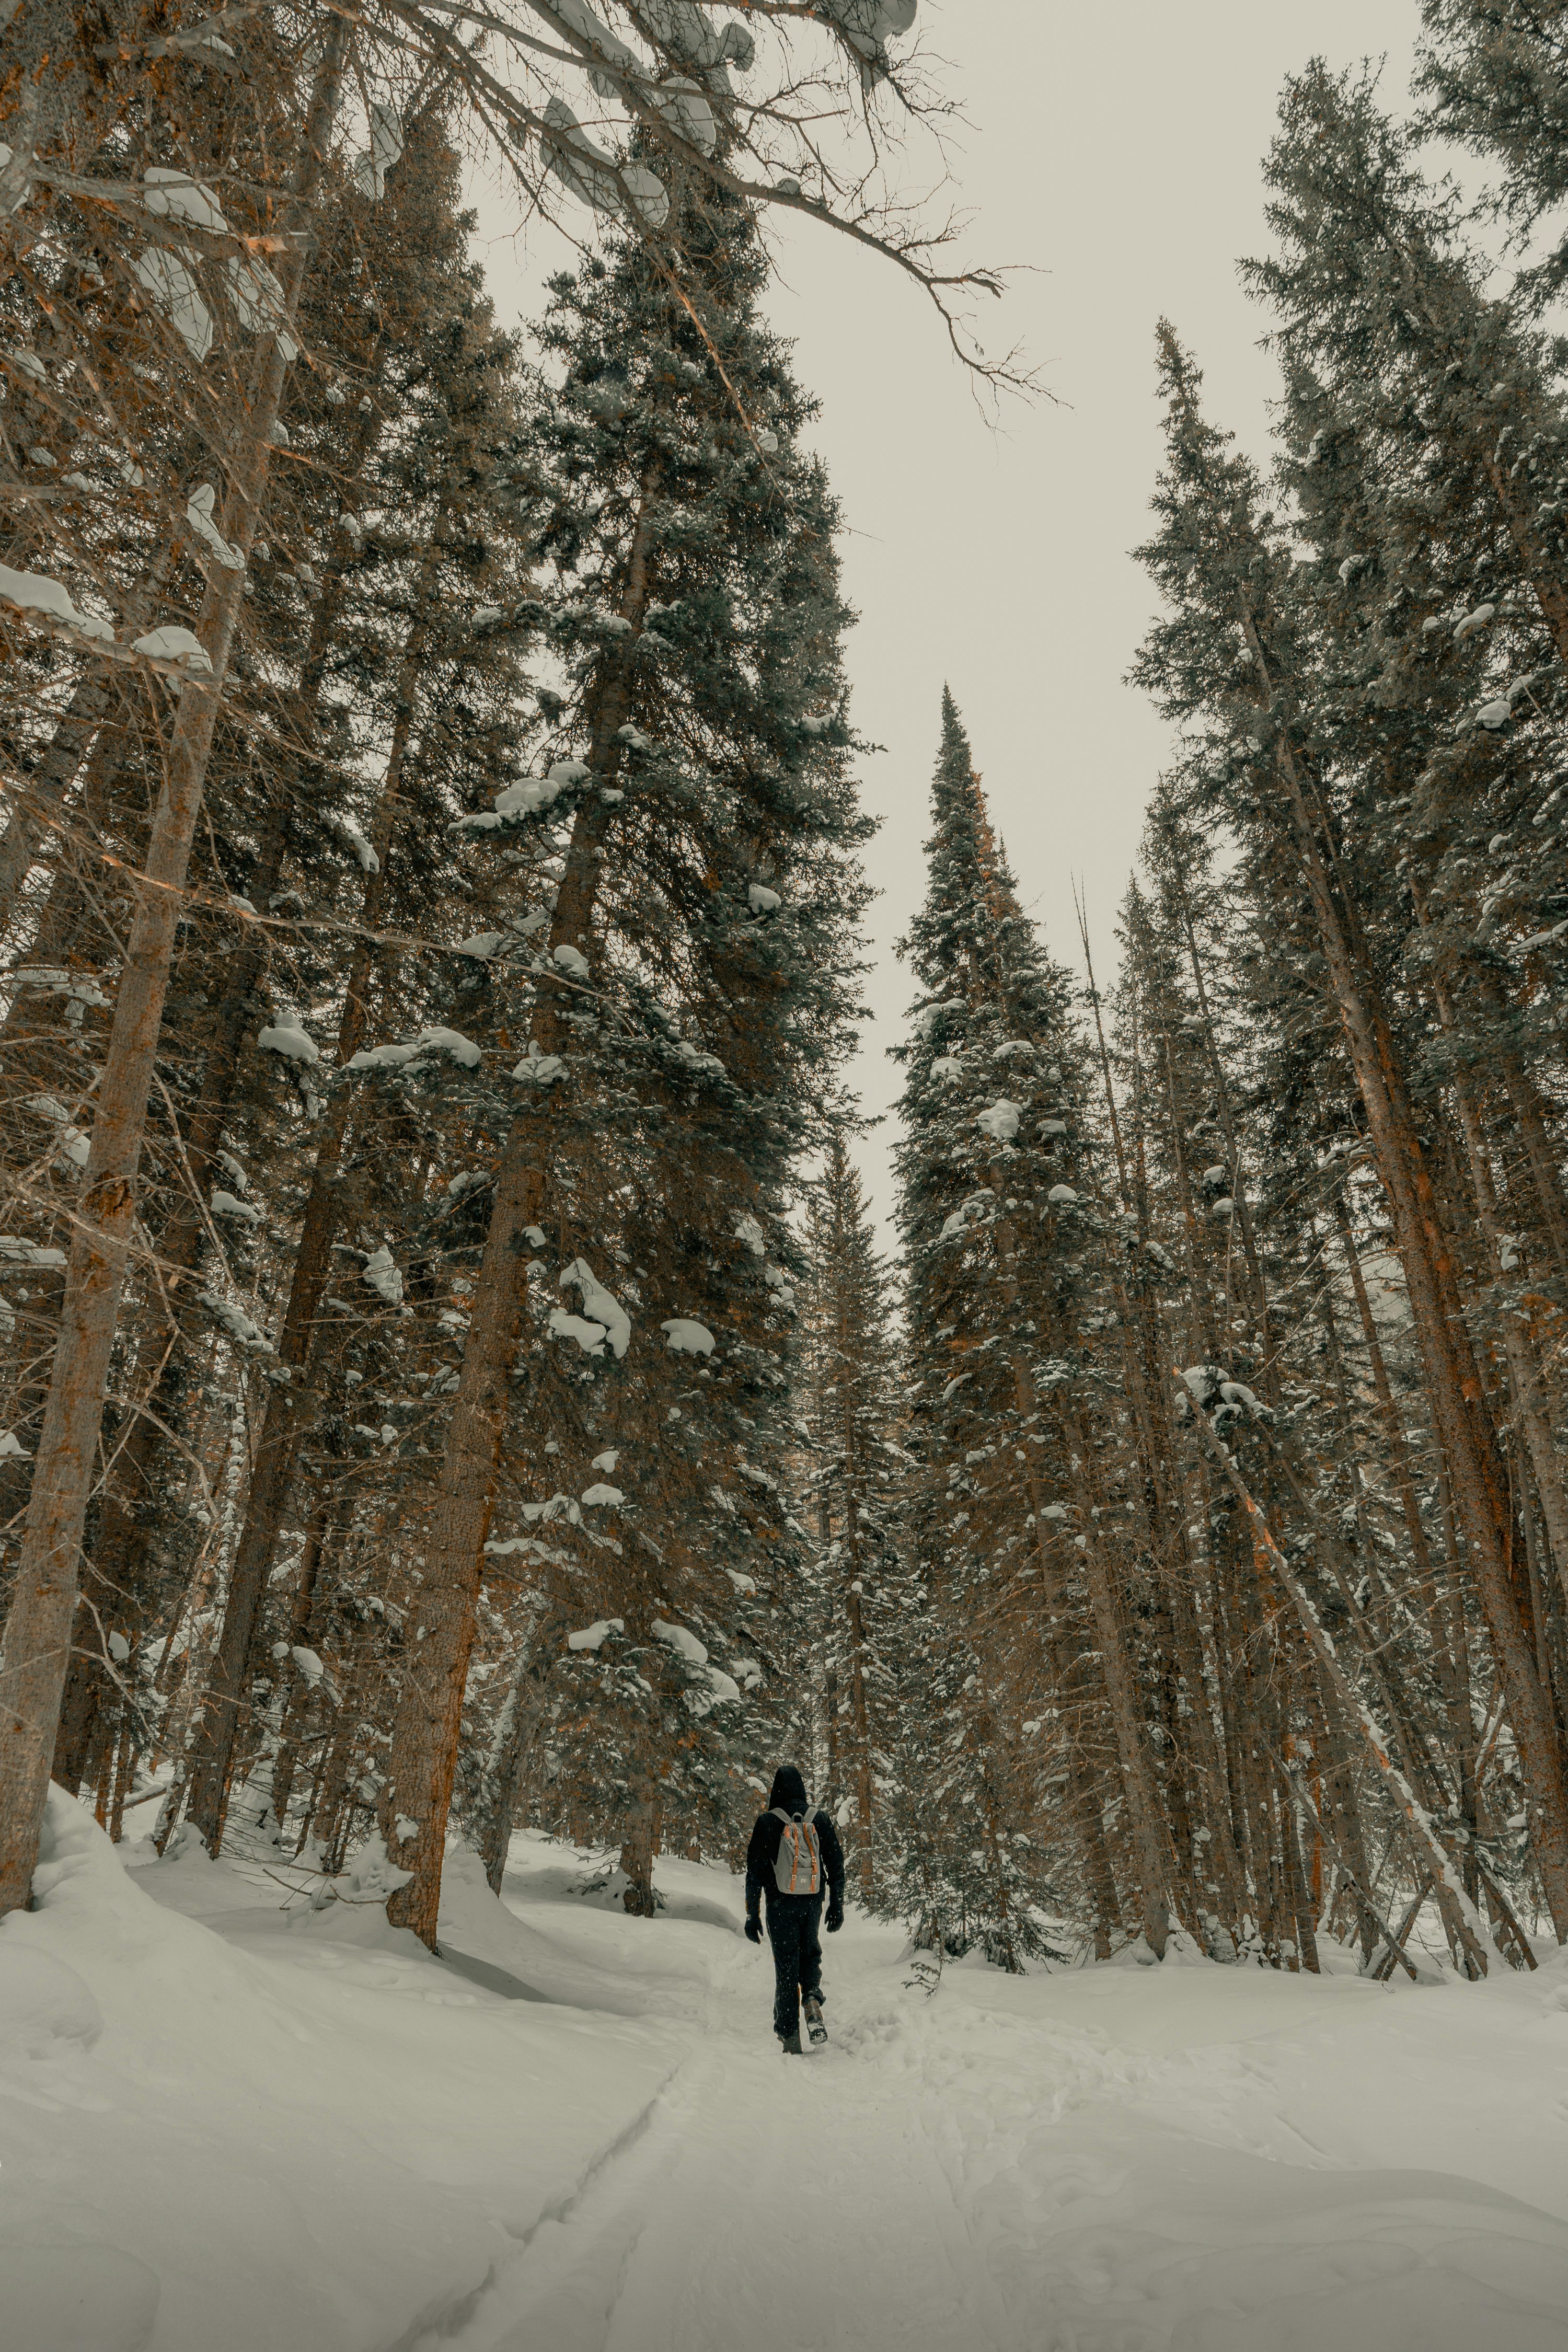 person walking on snow between pine trees